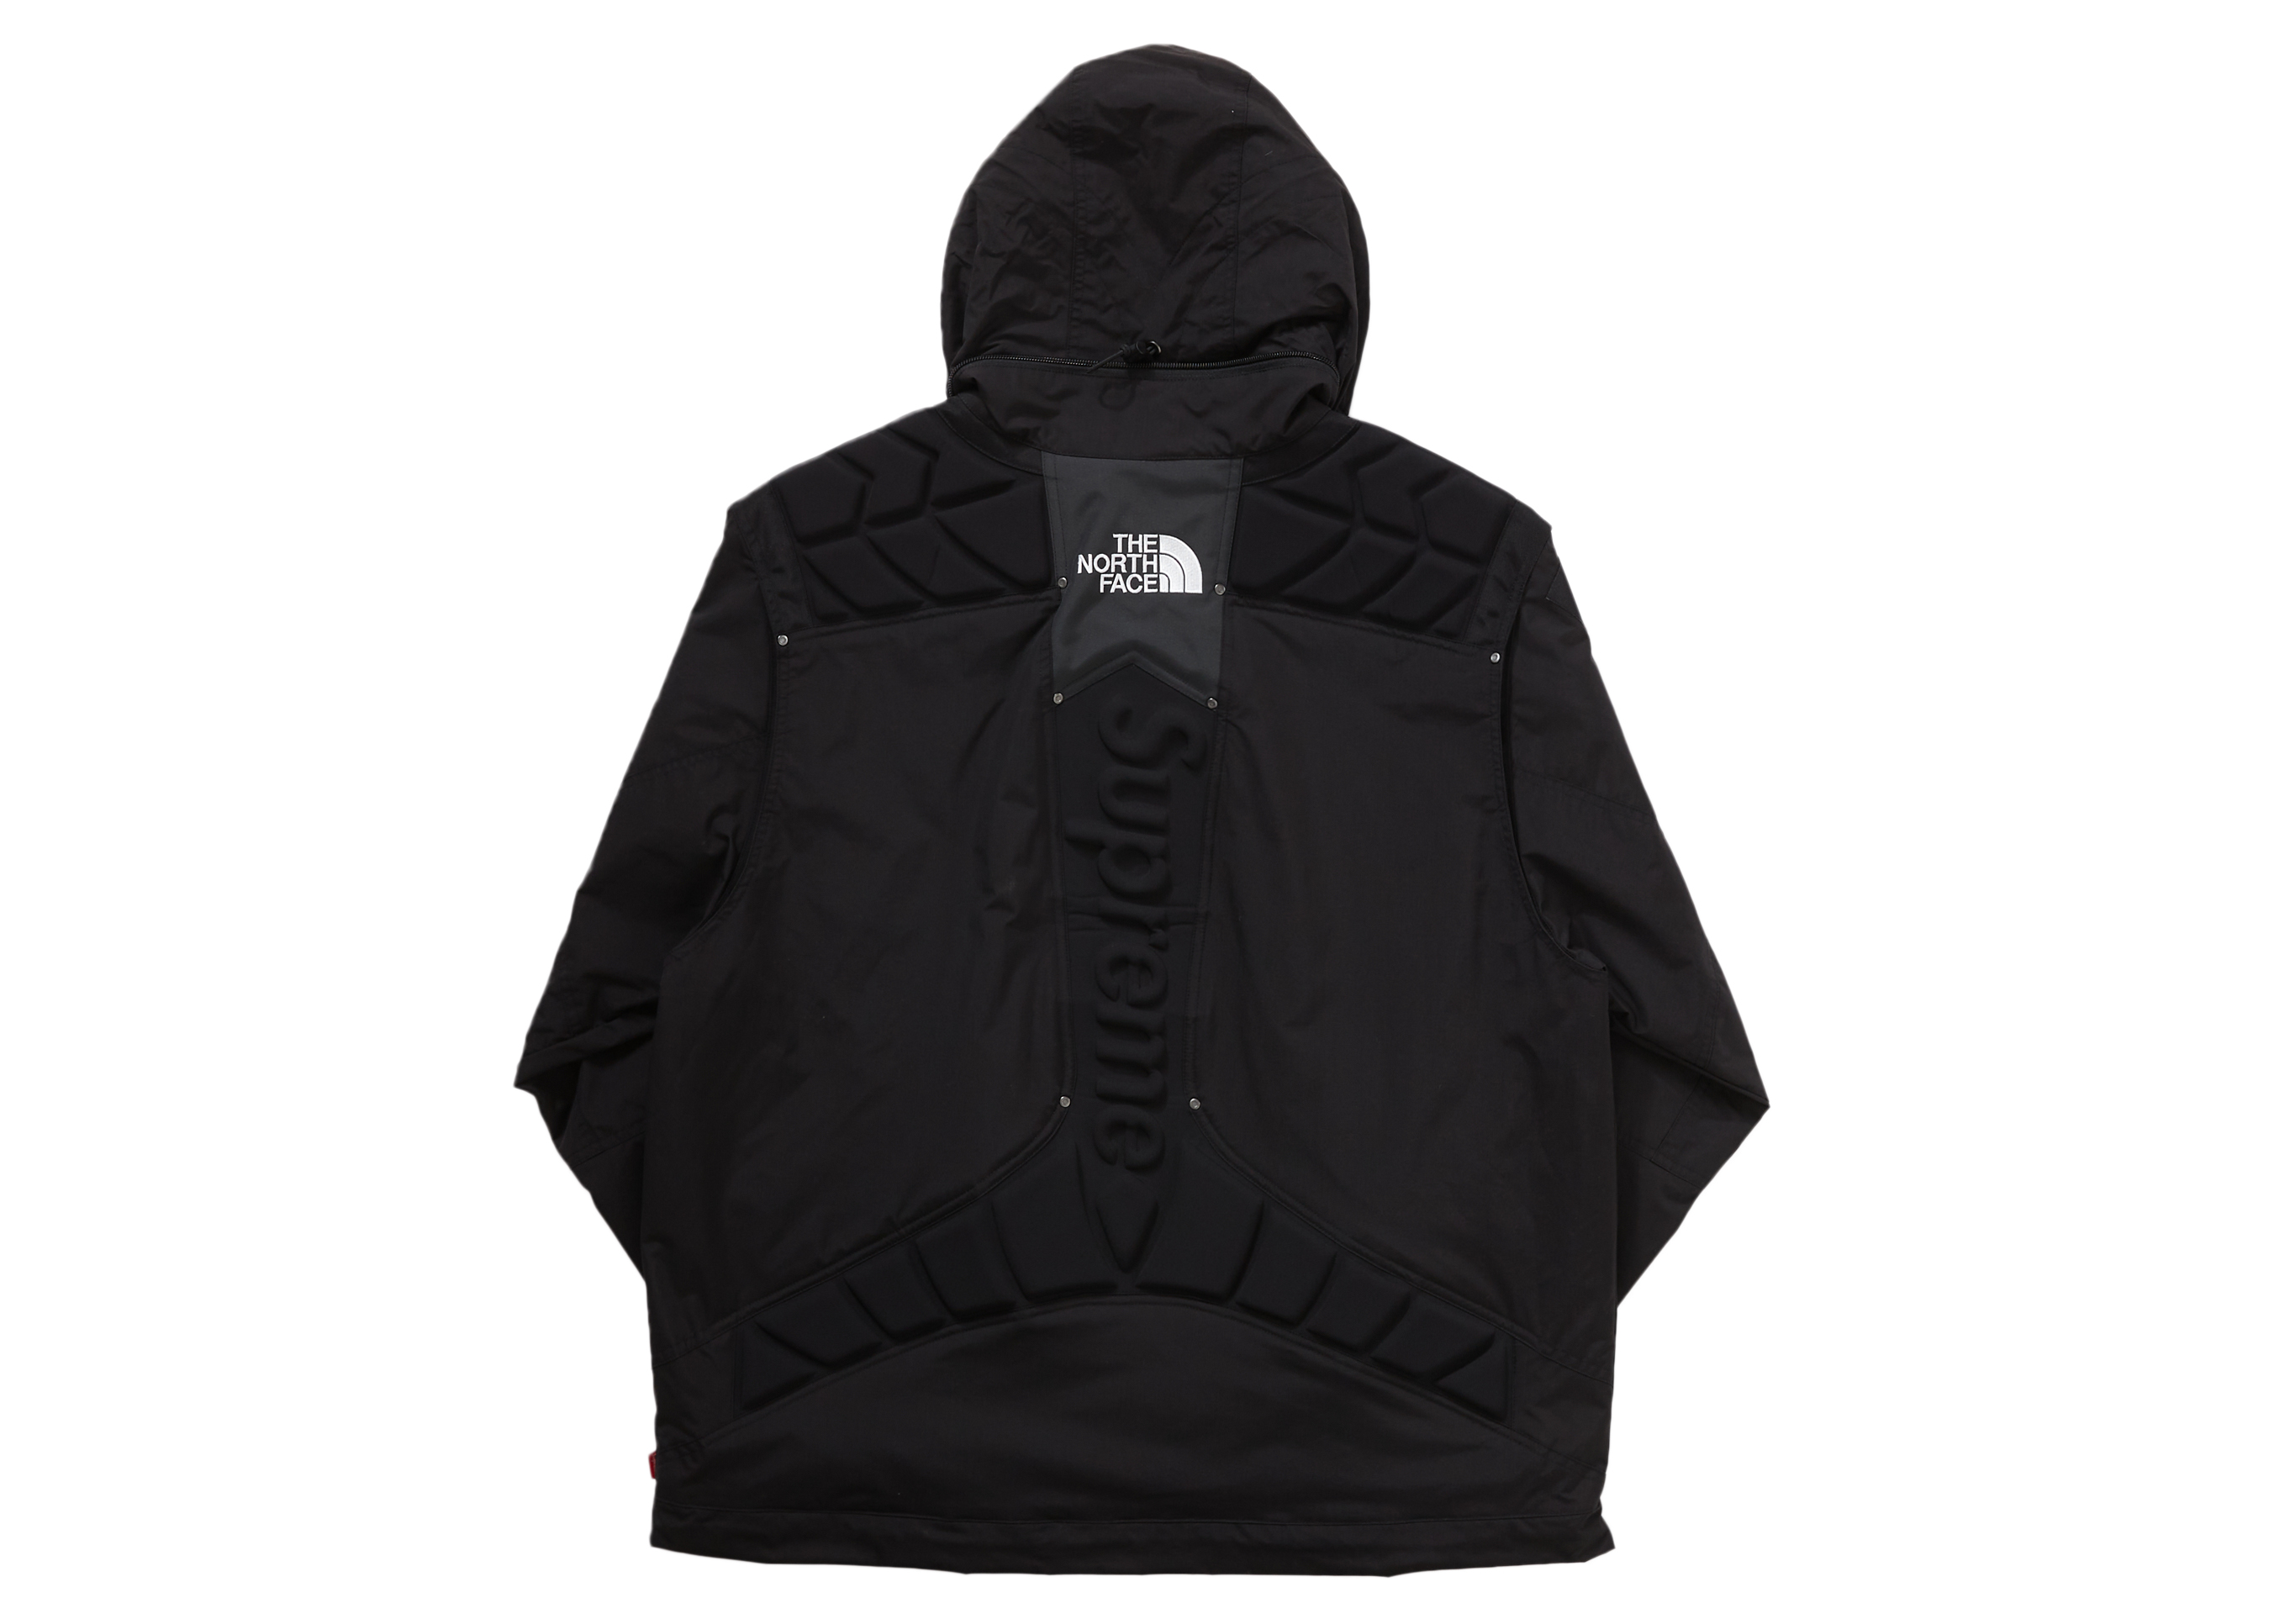 images.stockx.com/images/Supreme-The-North-Face-St